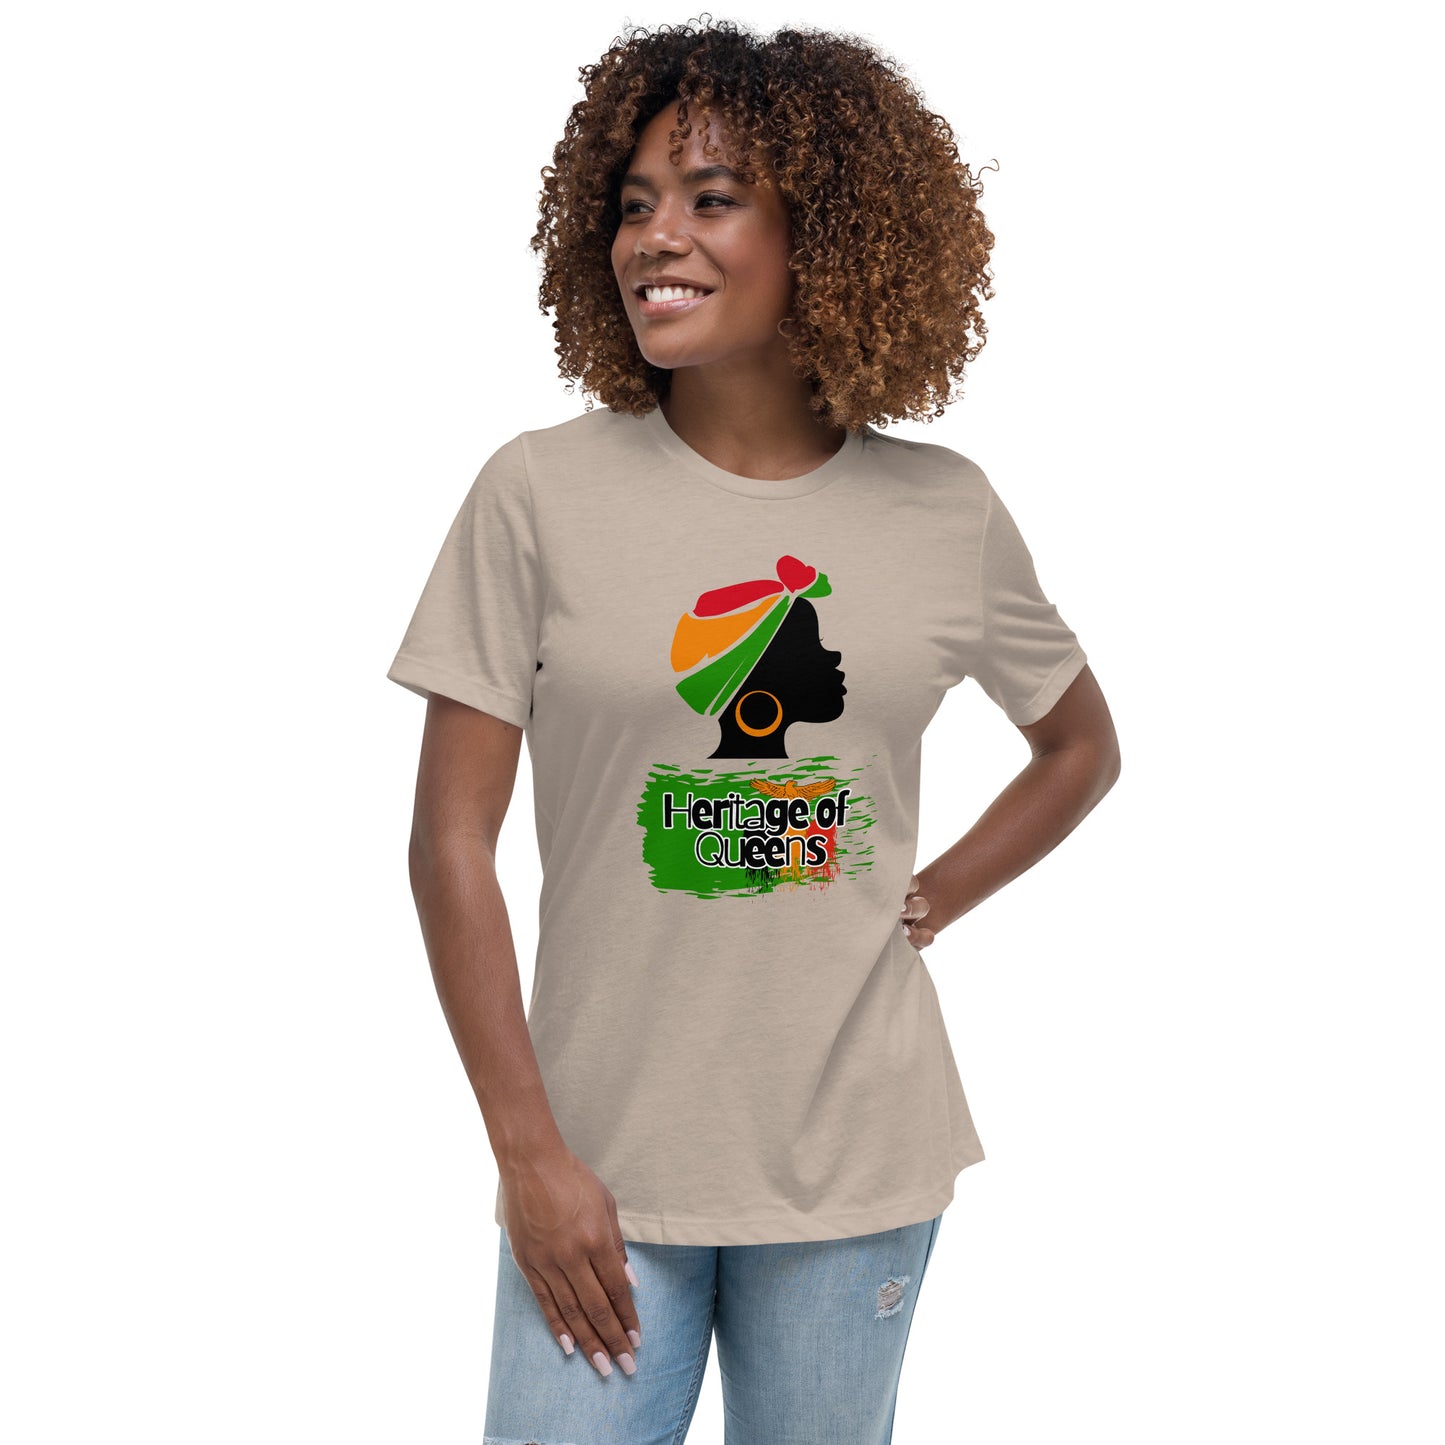 Women's Relaxed Zambia Heritage of QueensT-Shirt